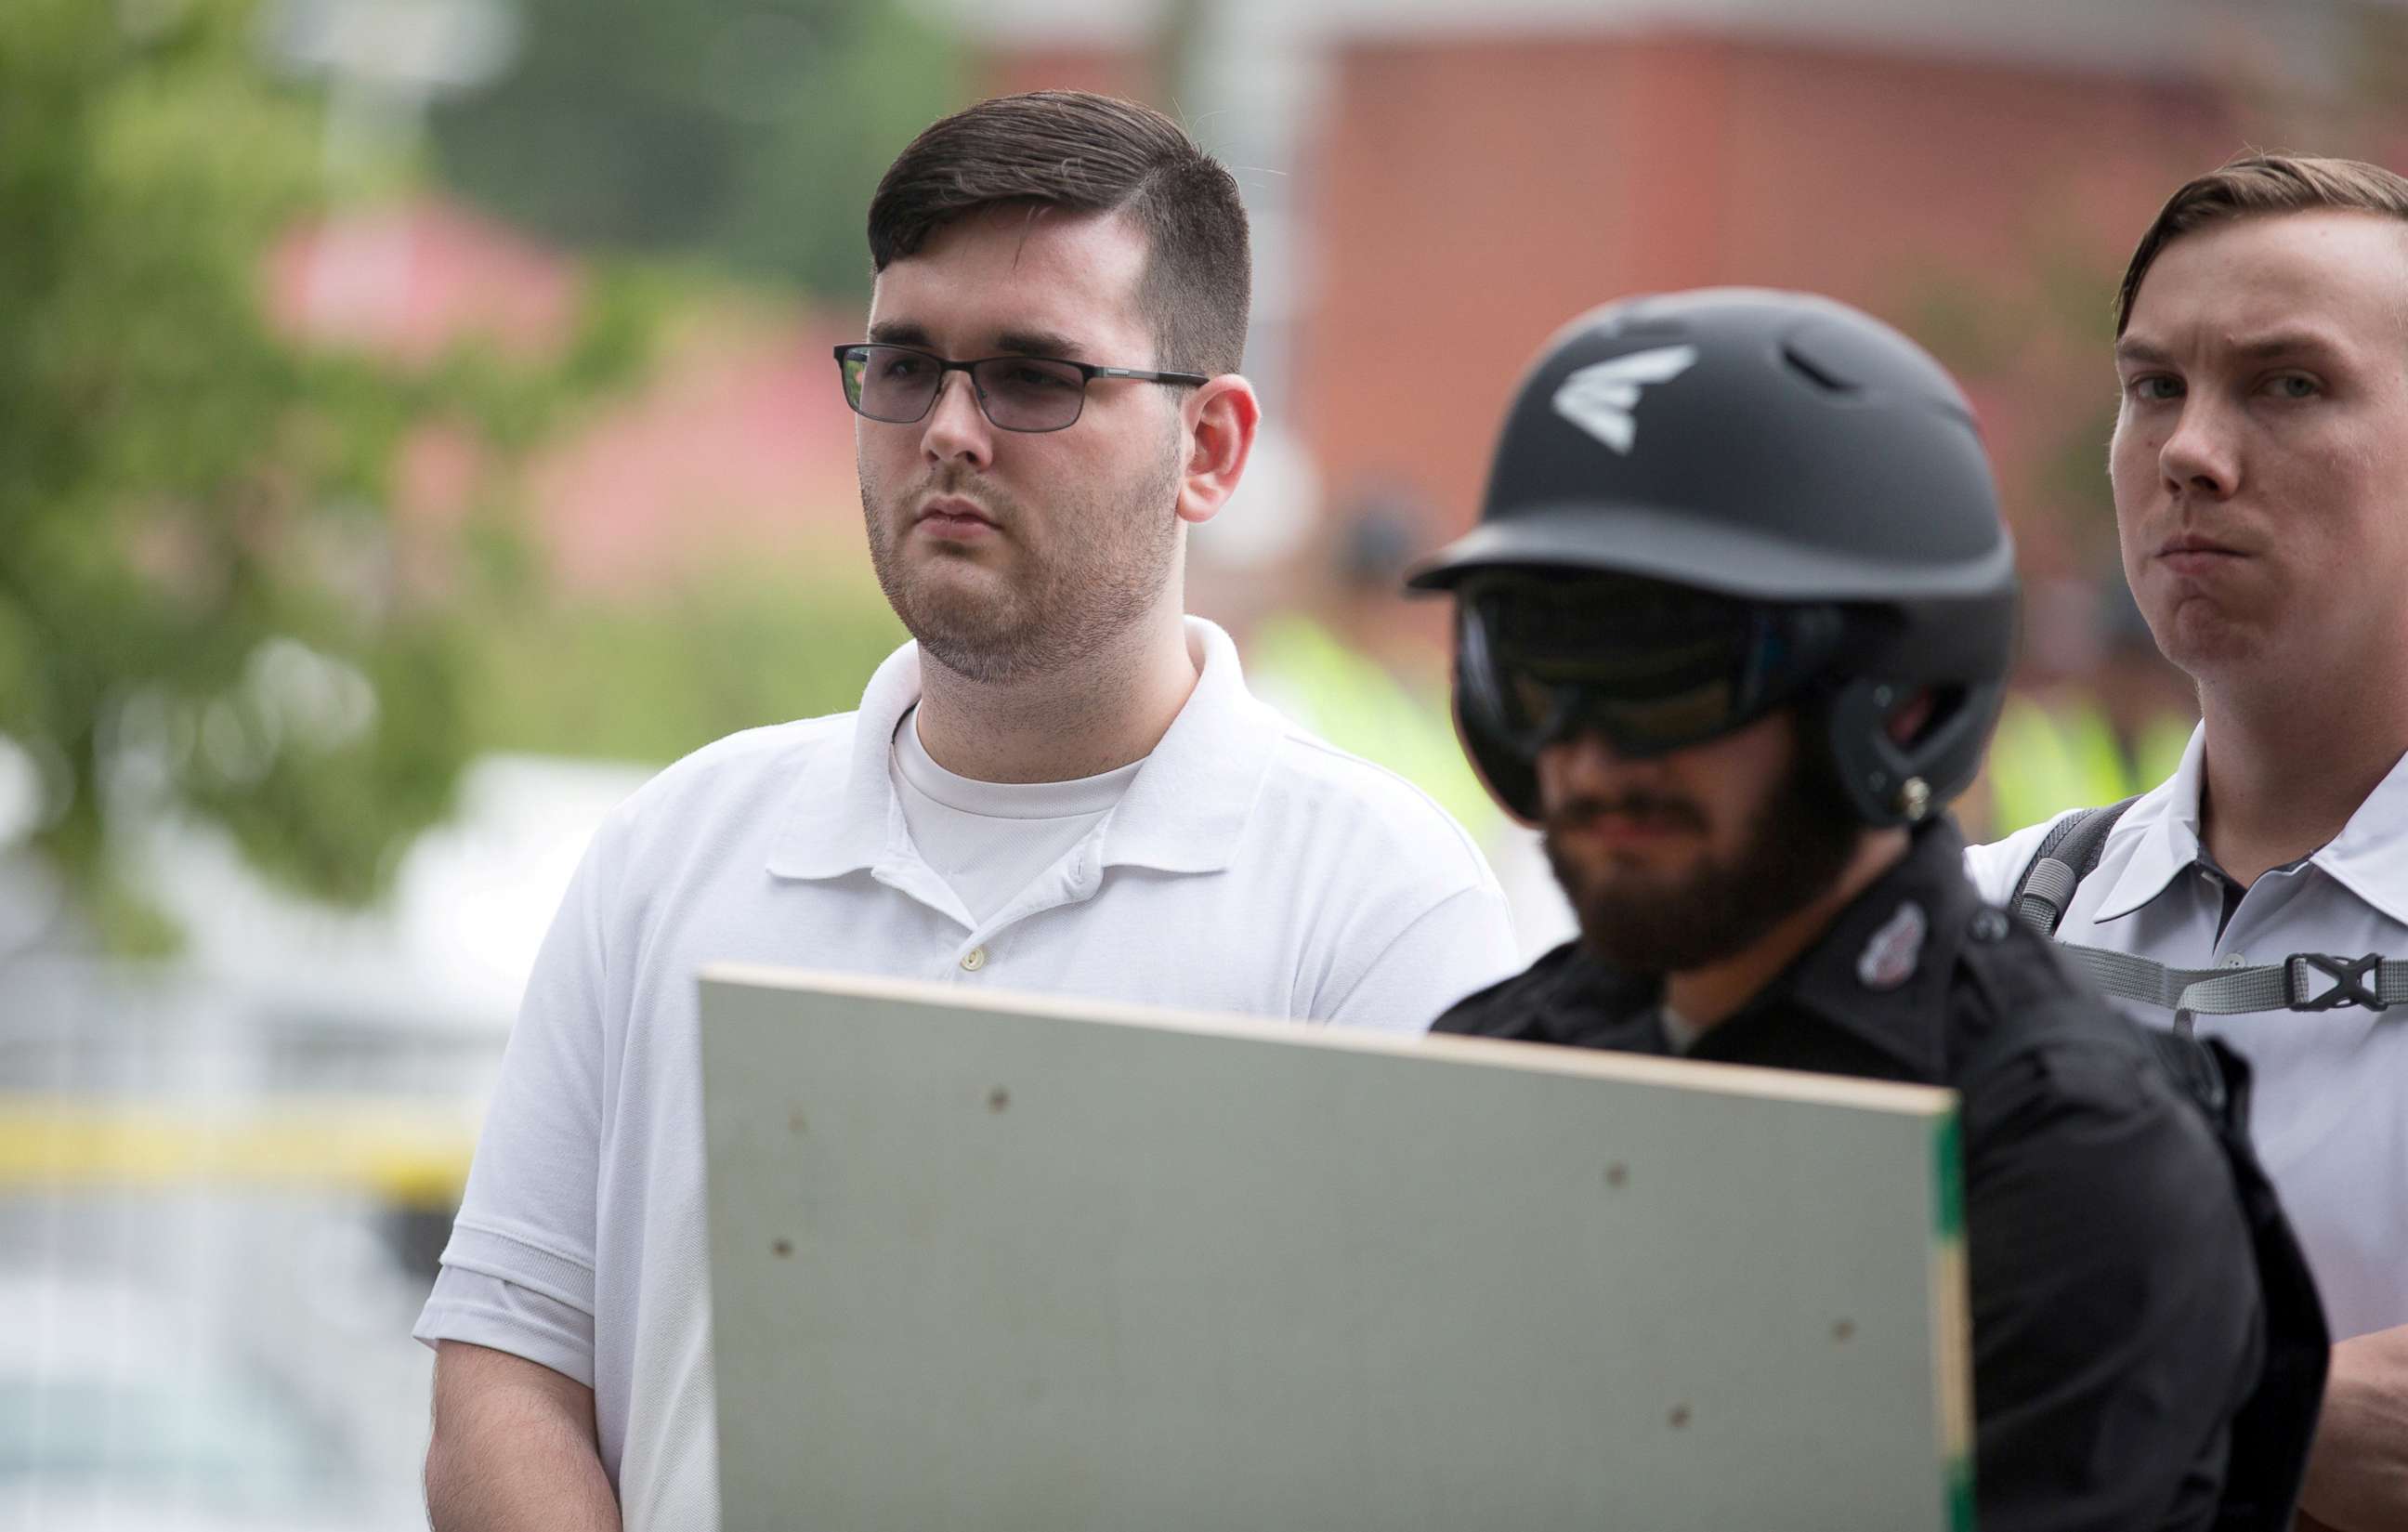 PHOTO: James Alex Fields Jr. is seen attending the "Unite the Right" rally in Emancipation Park before being arrested by police in Charlottesville, Va., Aug. 12, 2017.